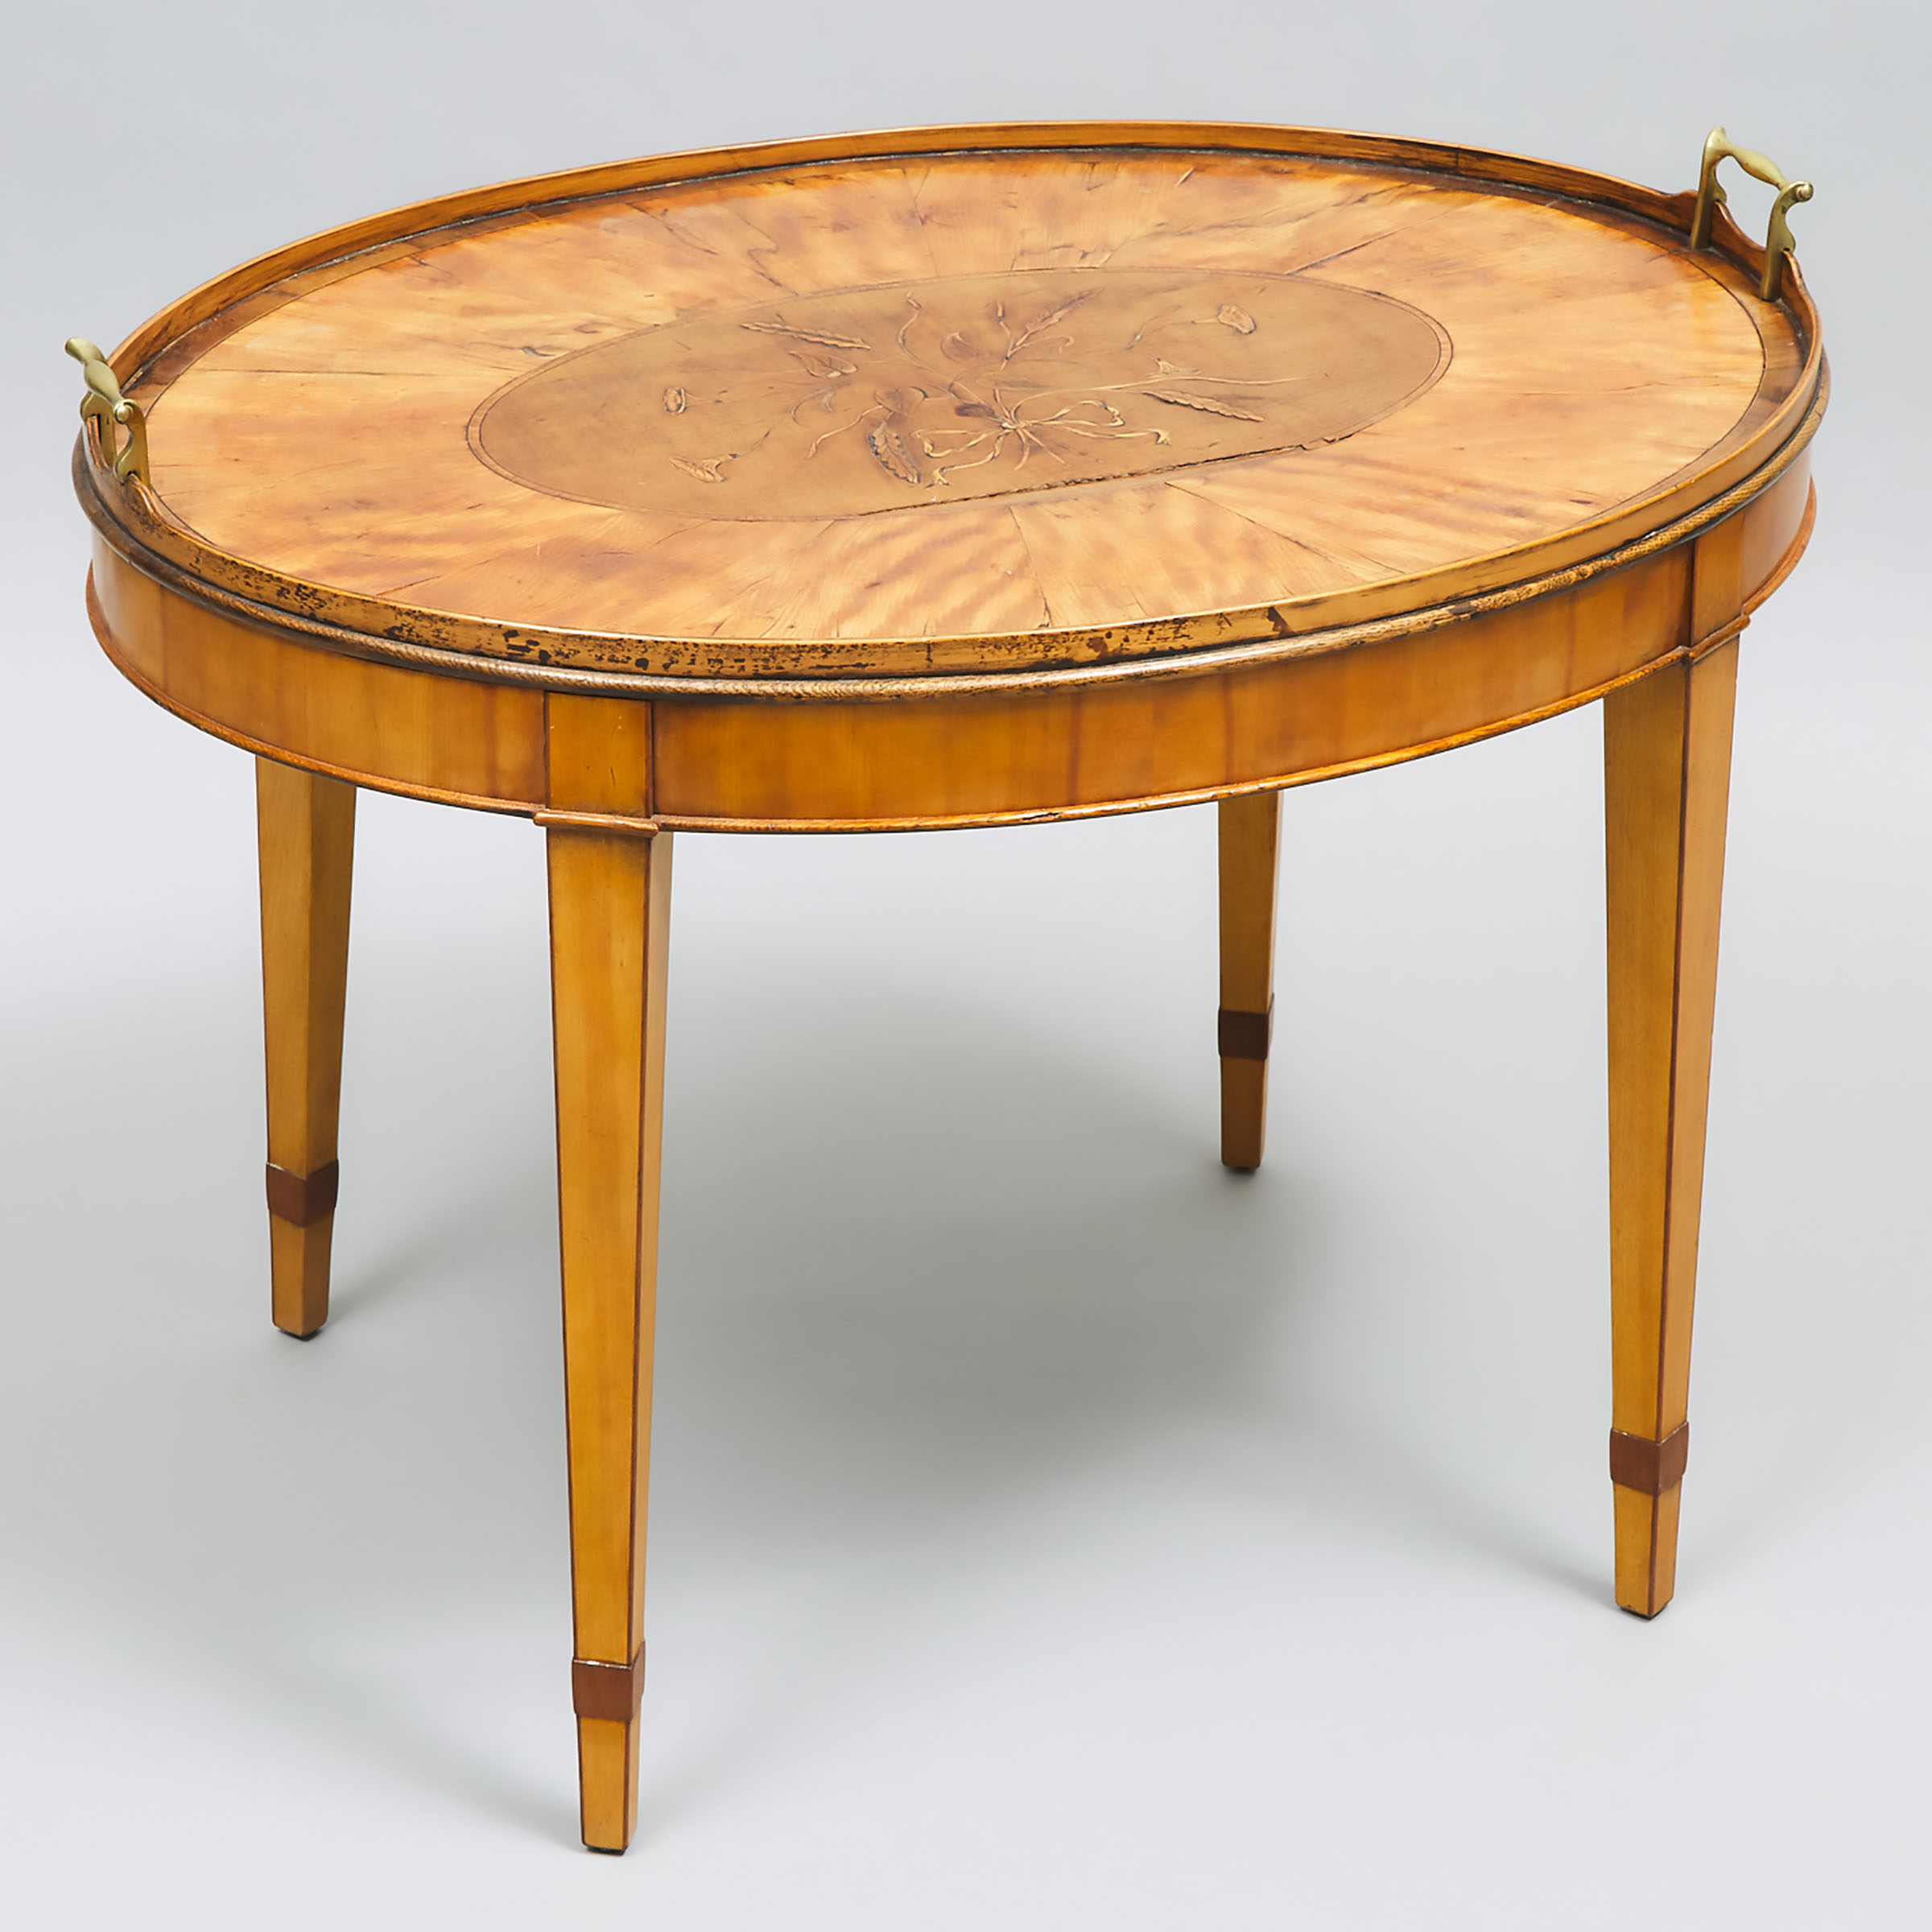 English Inlaid Walnut and Satinwood Tea Tray on Stand, early 19th century and Later